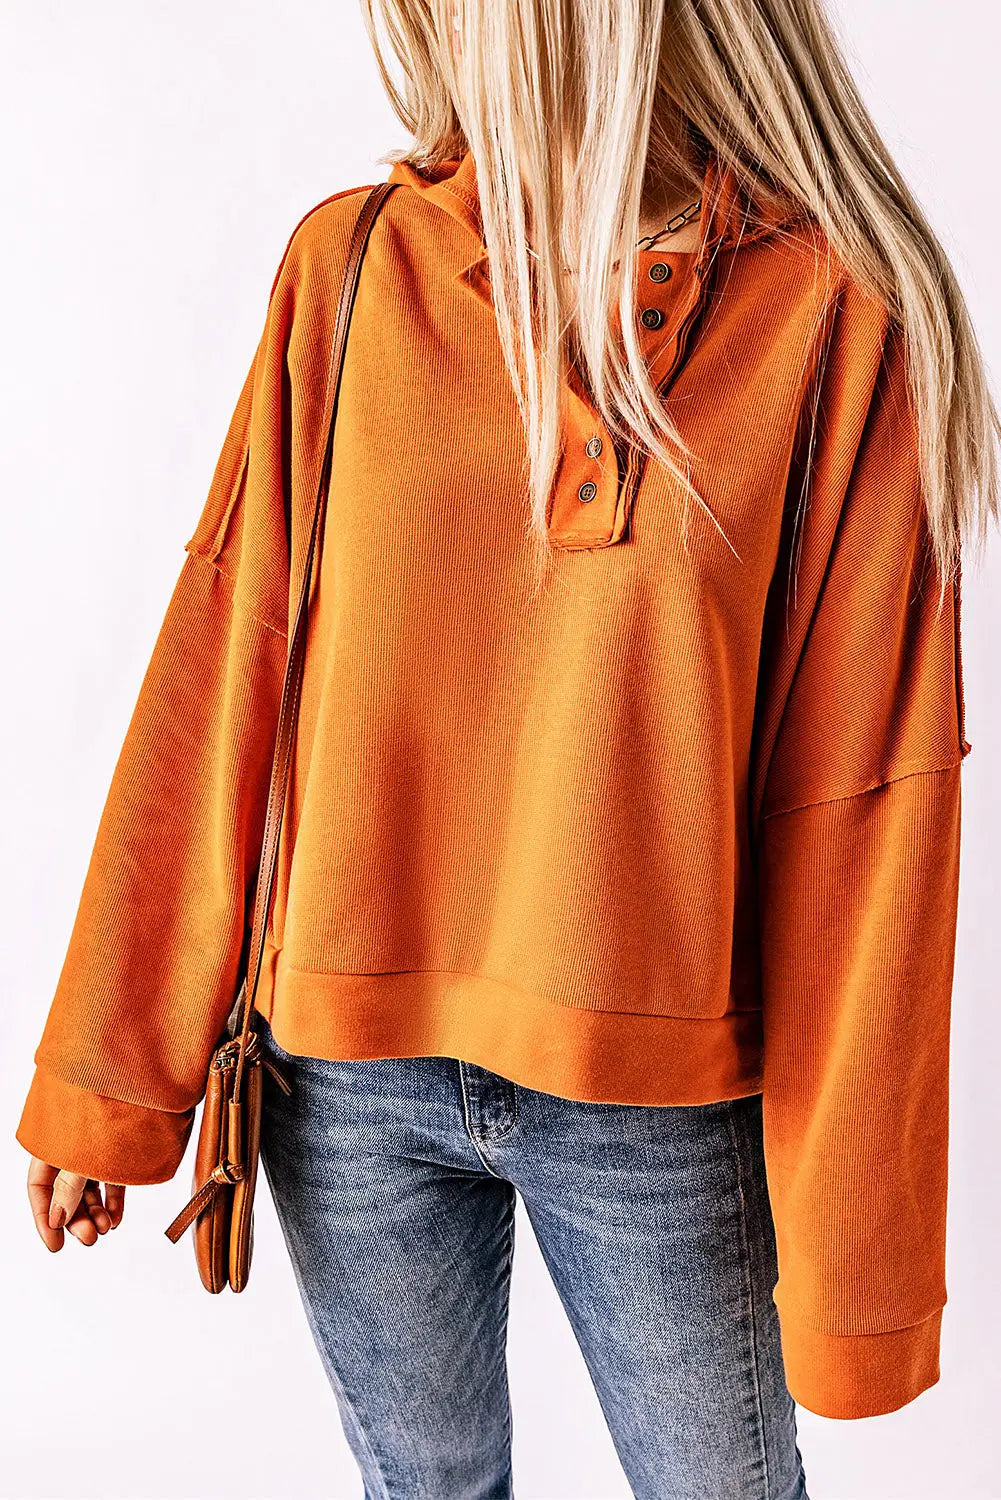 Khaki casual button solid patchwork trim hoodie - orange / s / 56% cotton + 44% polyester - tops